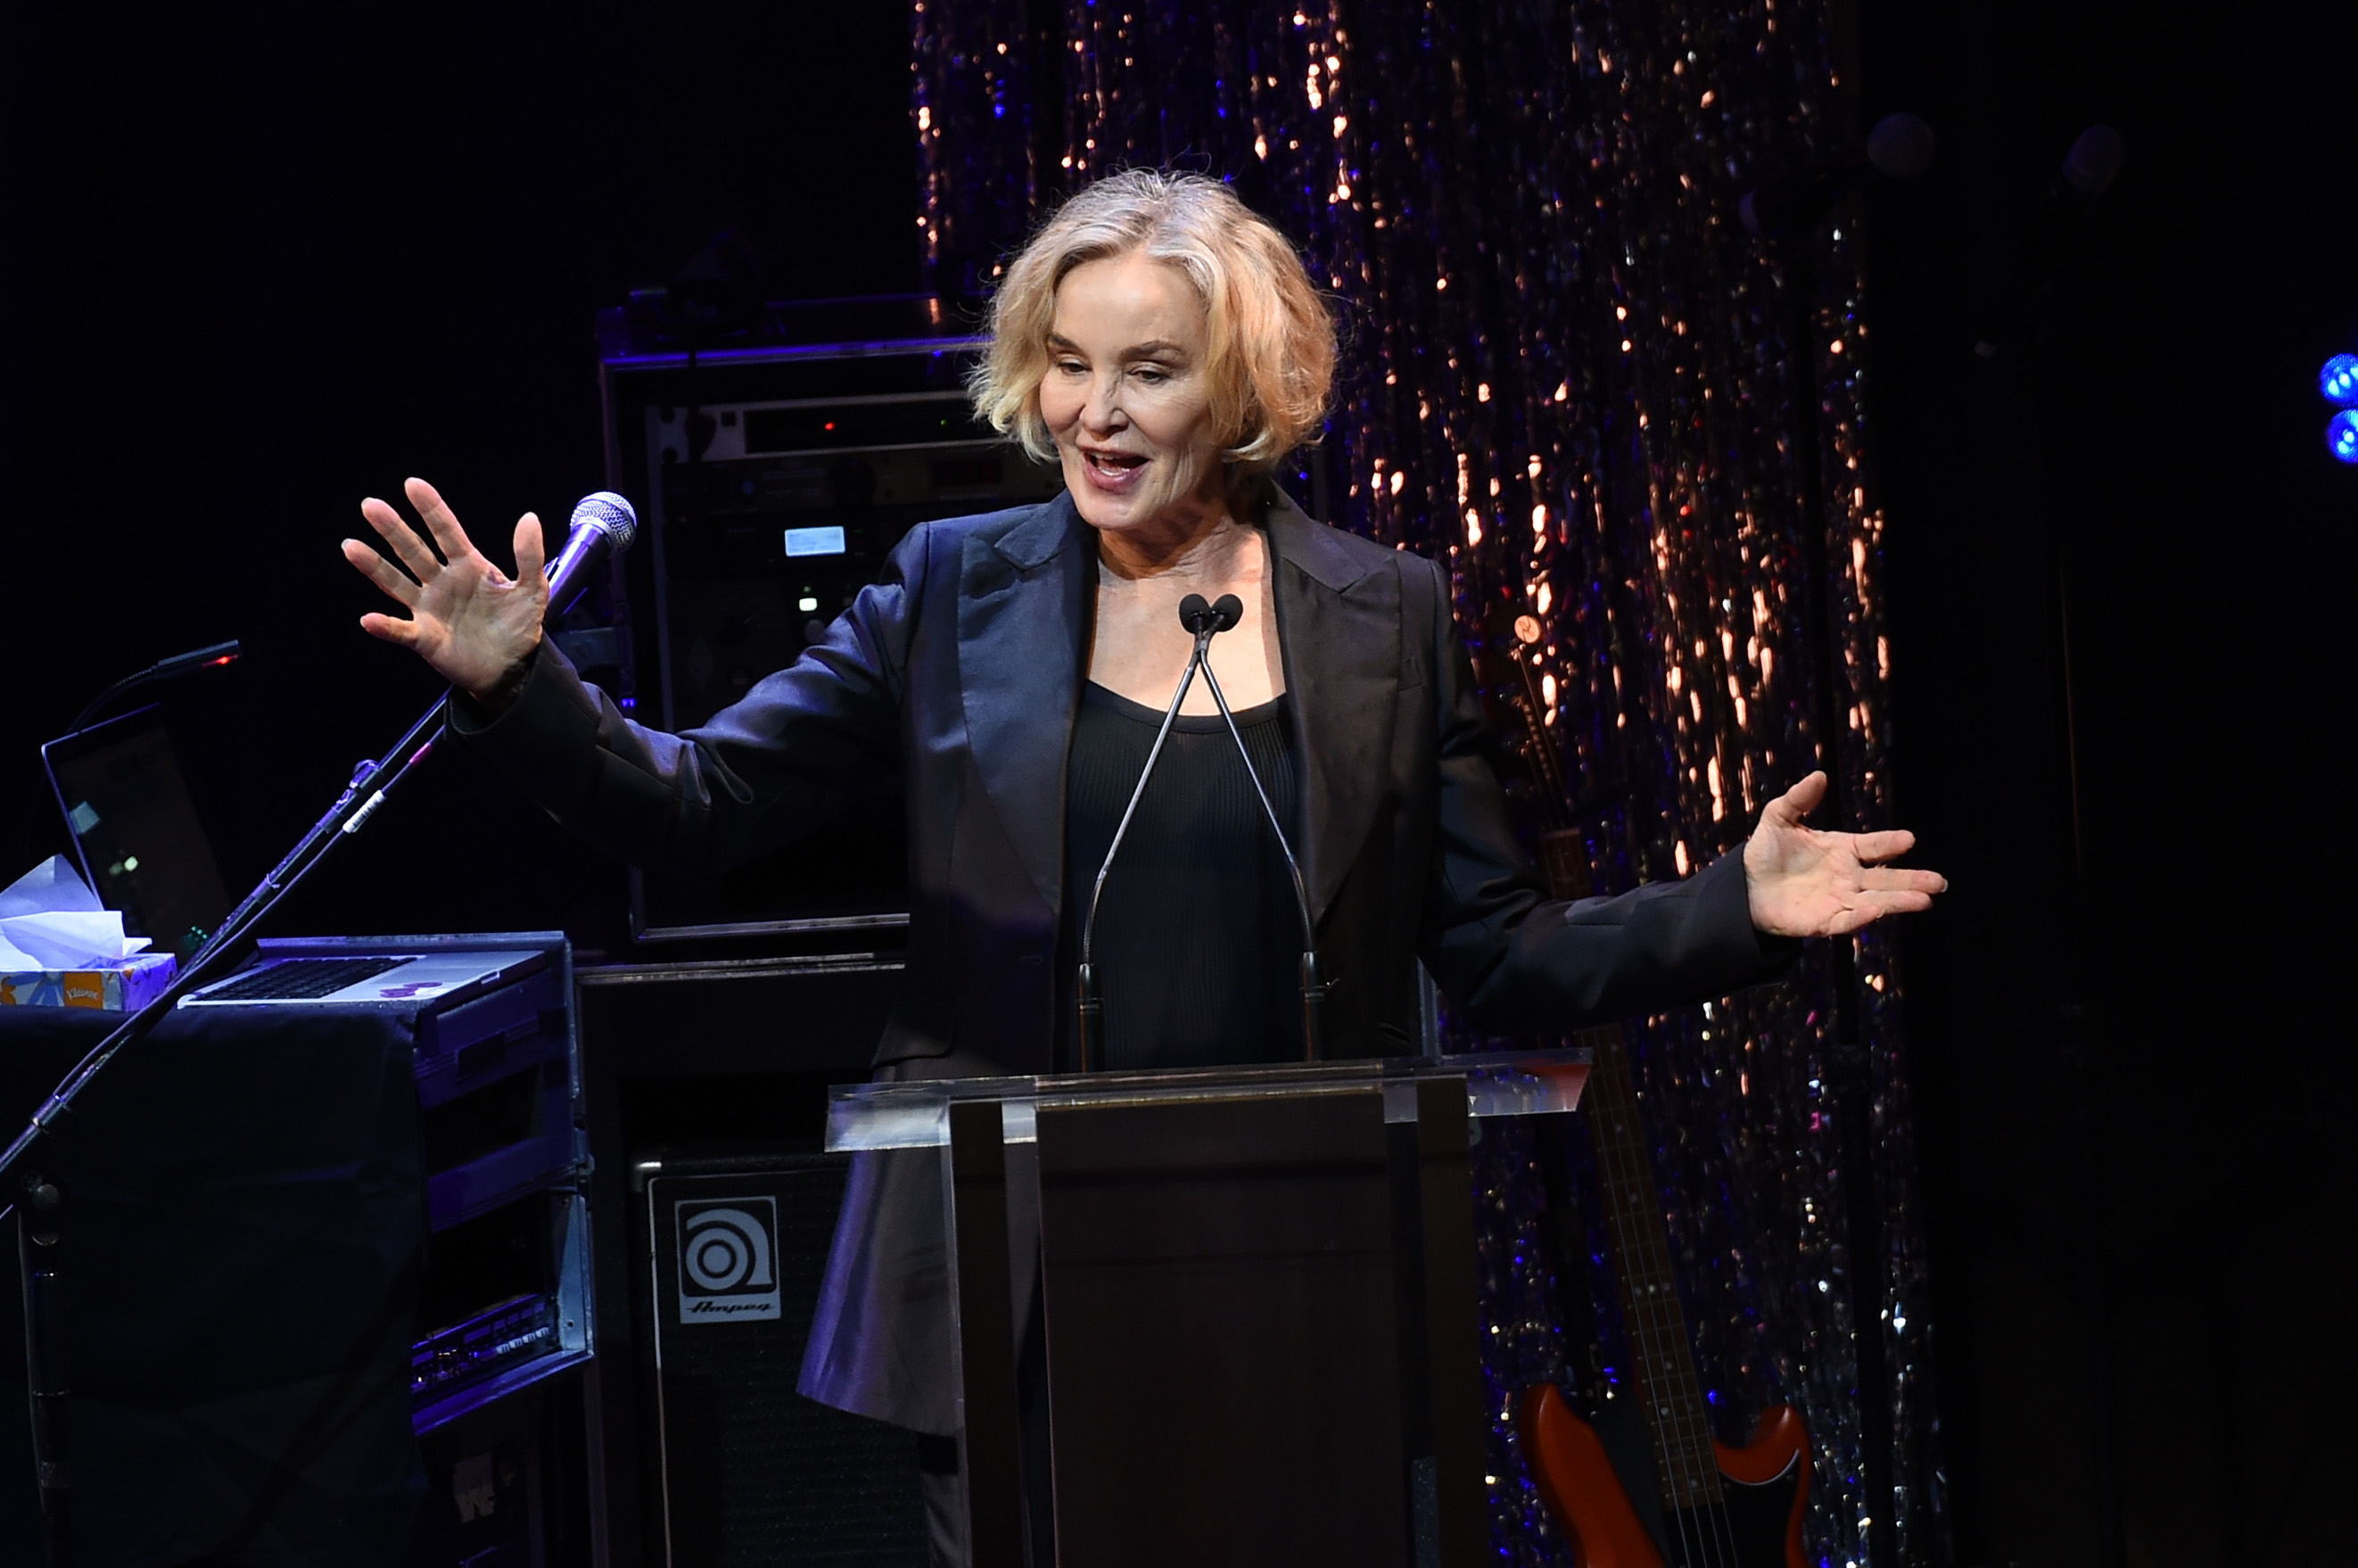 Jessica Lange speaks onstage at the Roundabout Theater's 2020 Gala at The Ziegfeld Ballroom on March 02, 2020 in New York City. | Source: Getty Images